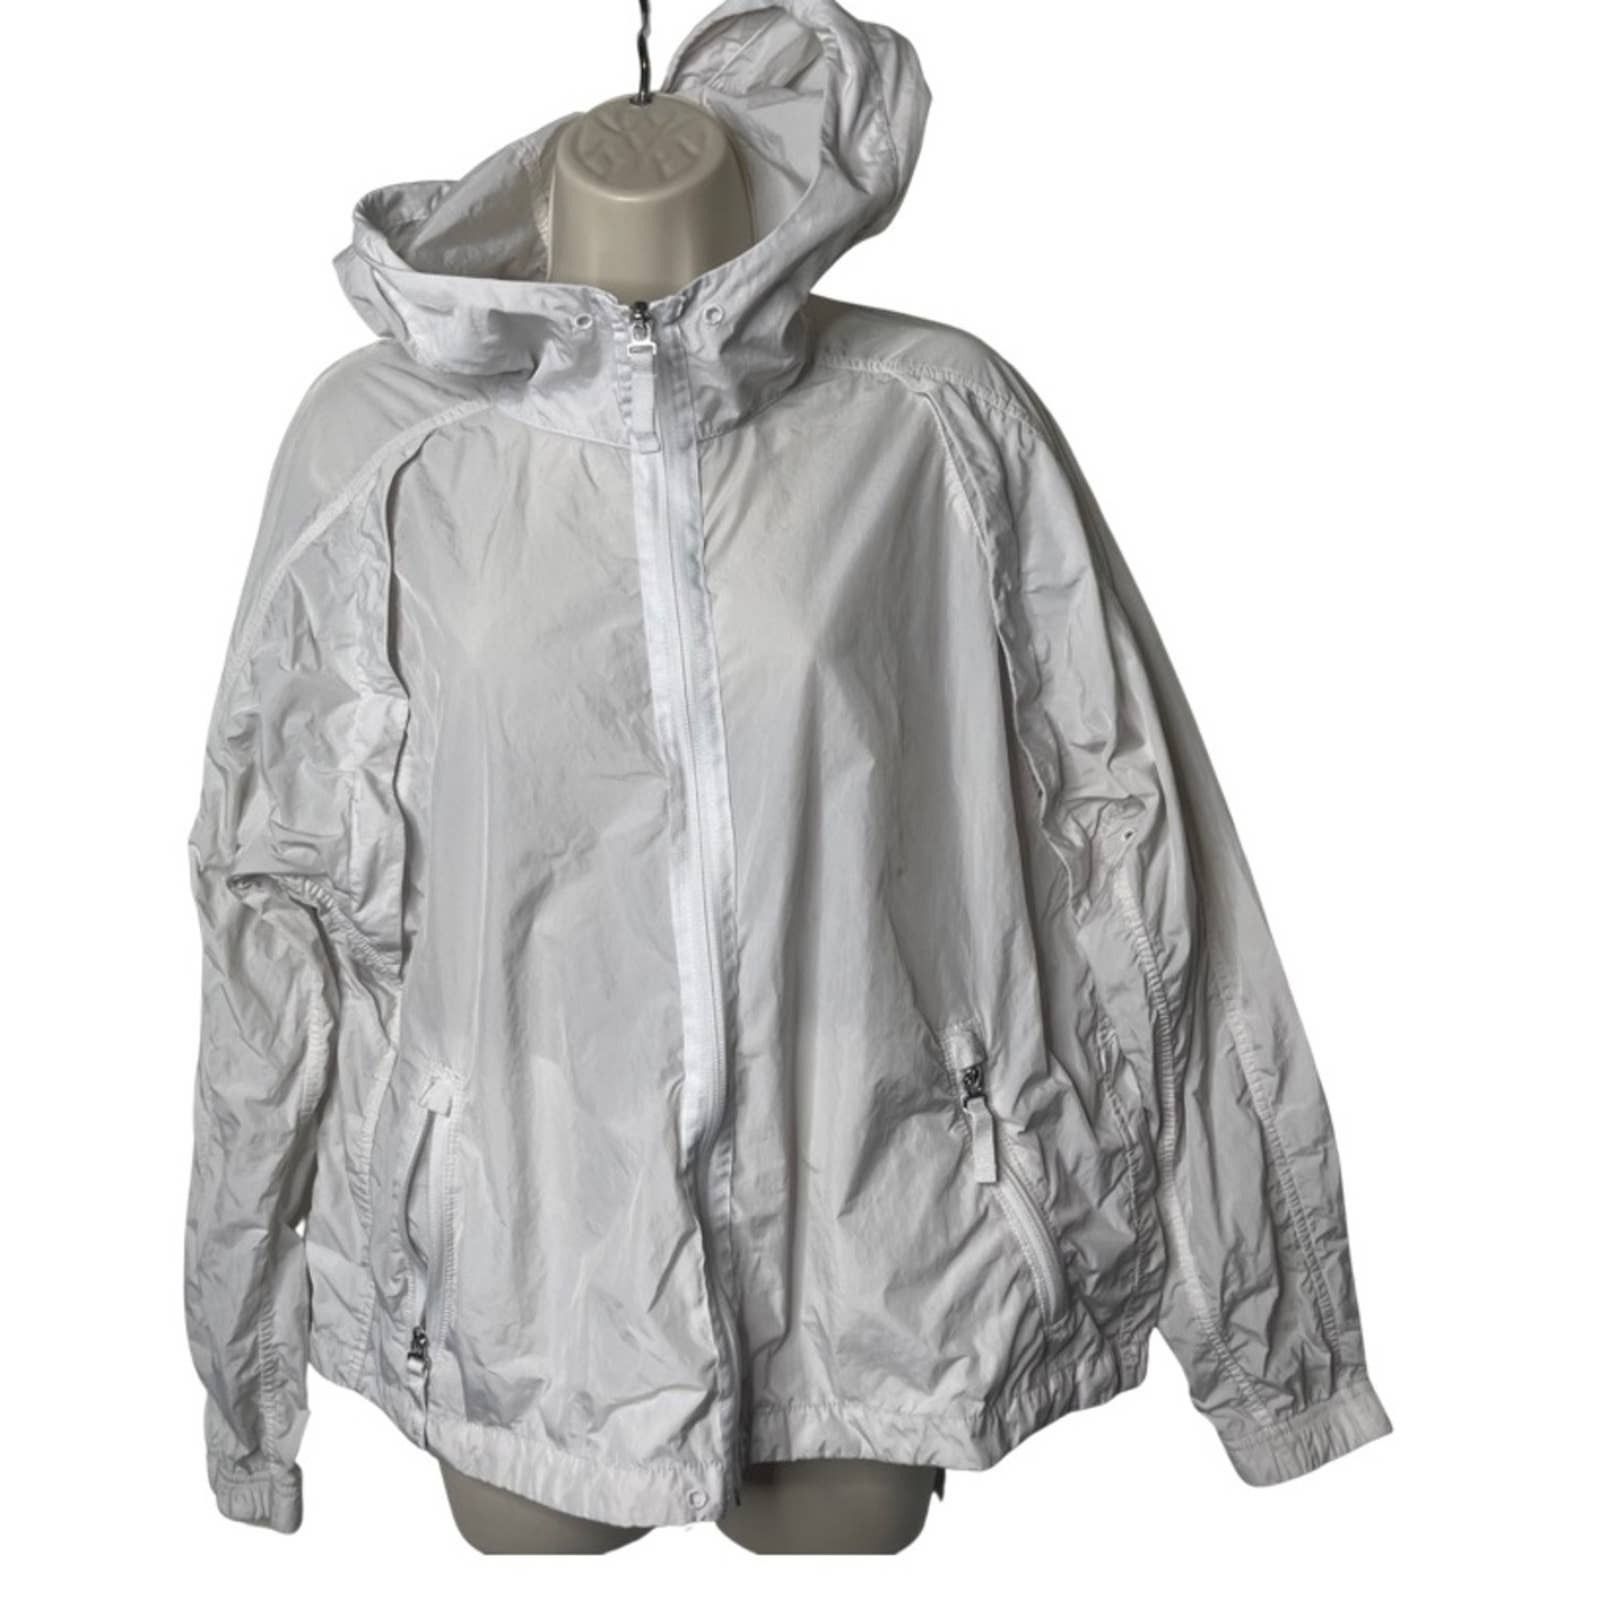 Other Athleta Expedition Hike Shell Lightweight Mesh Jacket Size M / US 6-8 / IT 42-44 - 1 Preview